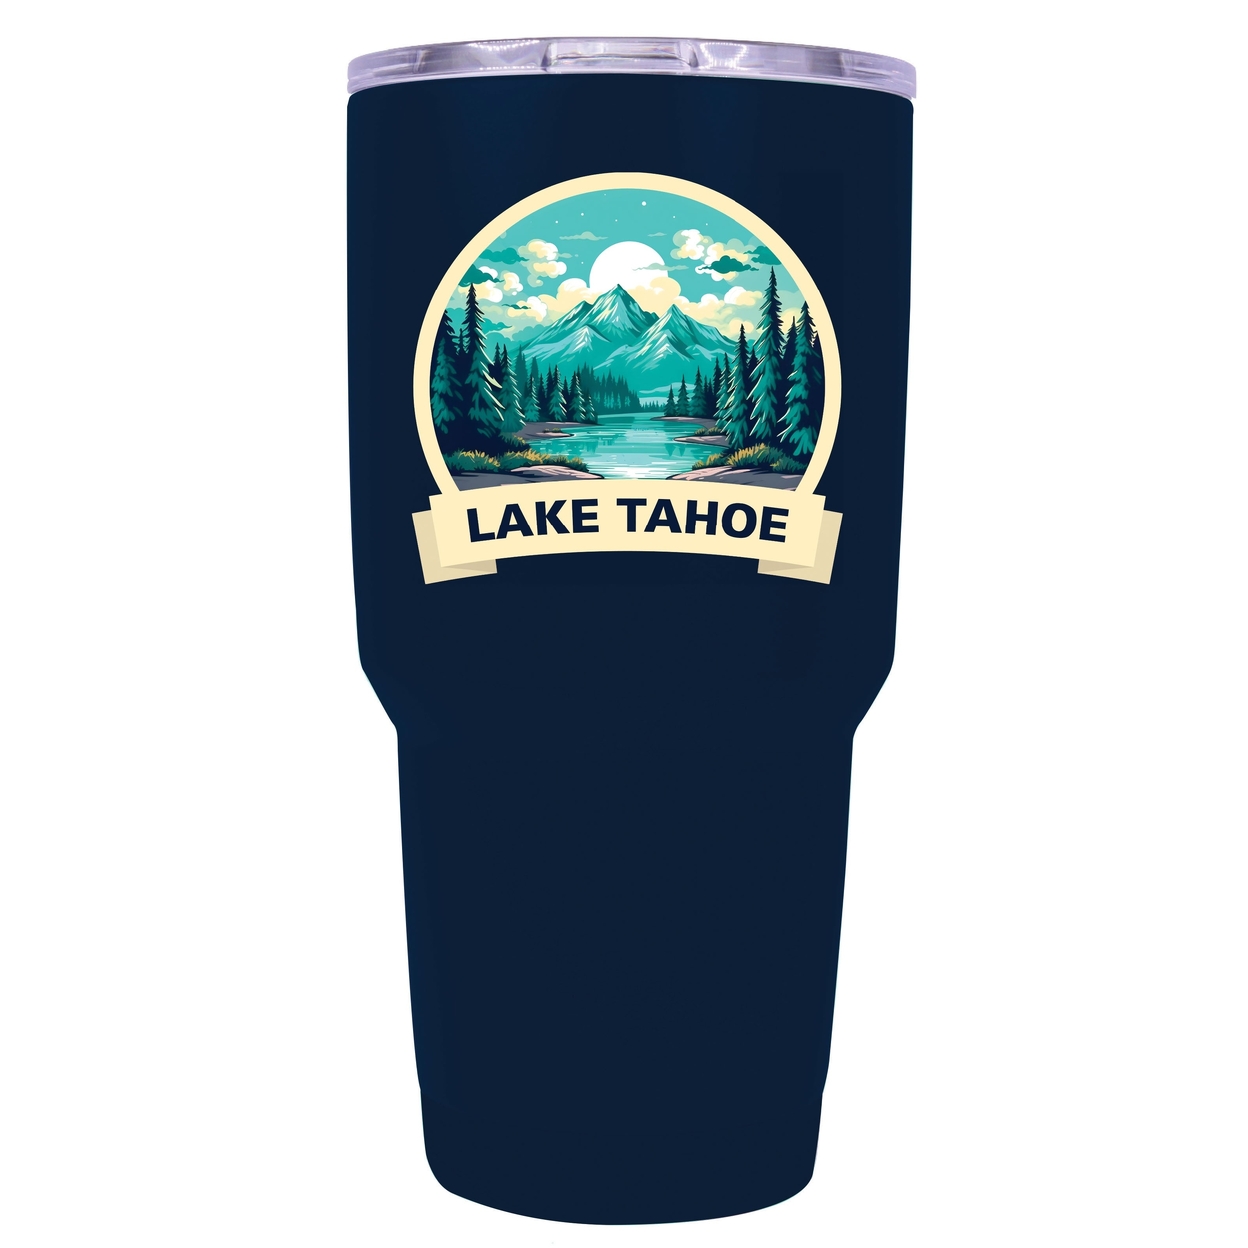 Lake Tahoe California Souvenir 24 Oz Insulated Stainless Steel Tumbler - Navy,,4-Pack